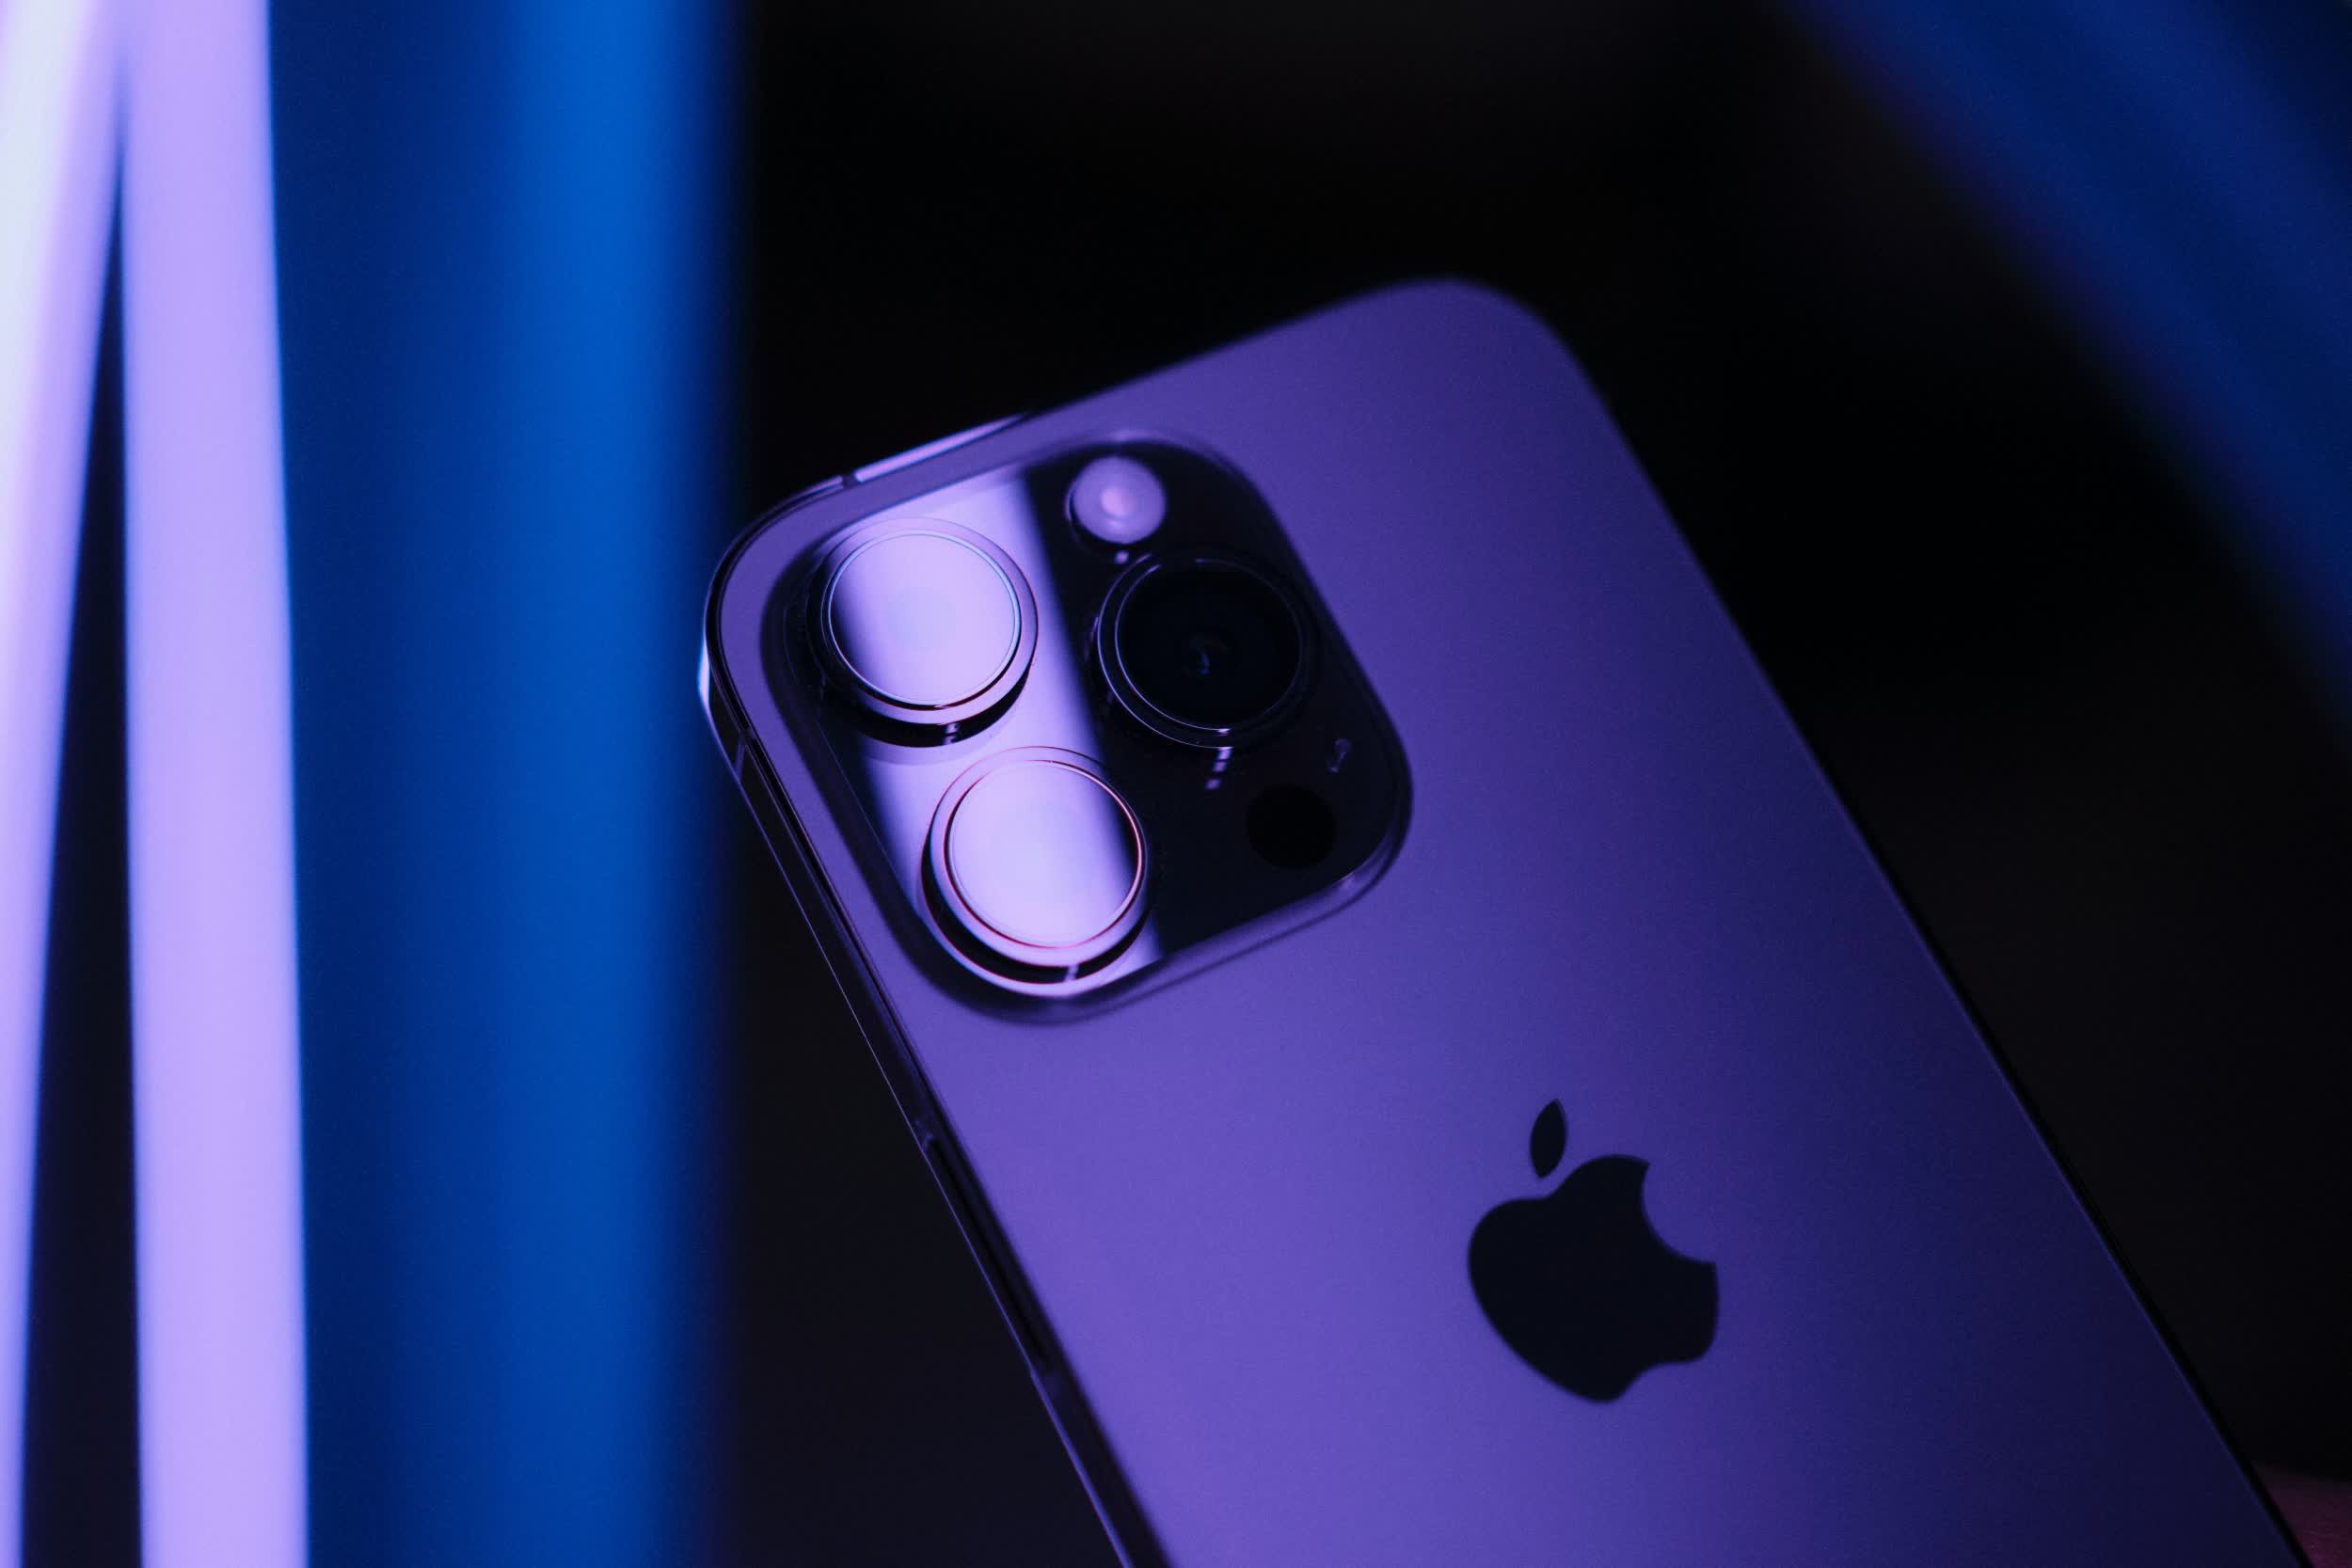 Most Apple iPhones in the US are sold through carriers